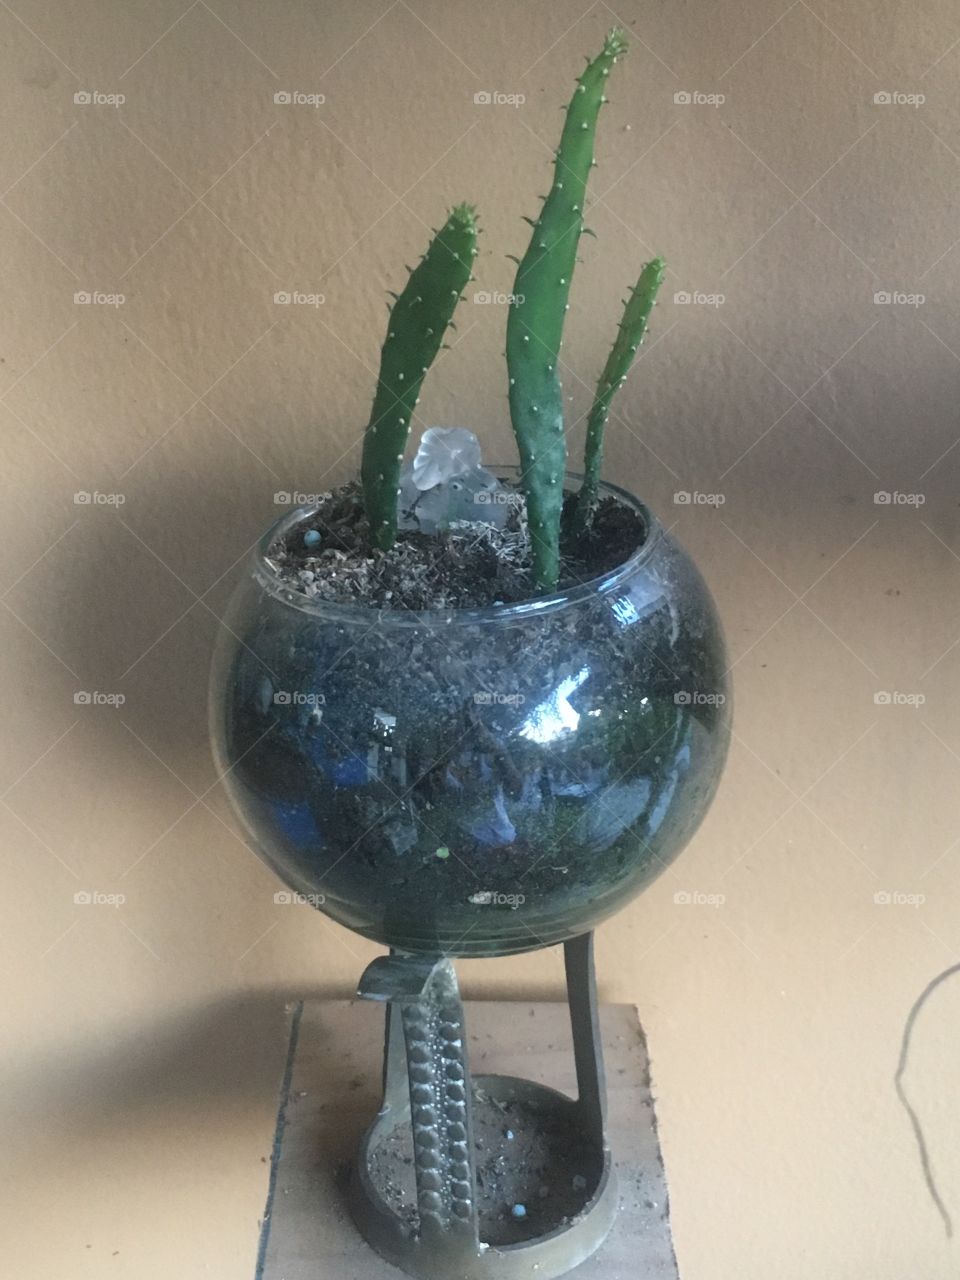 Little cactus in a fishbowl 